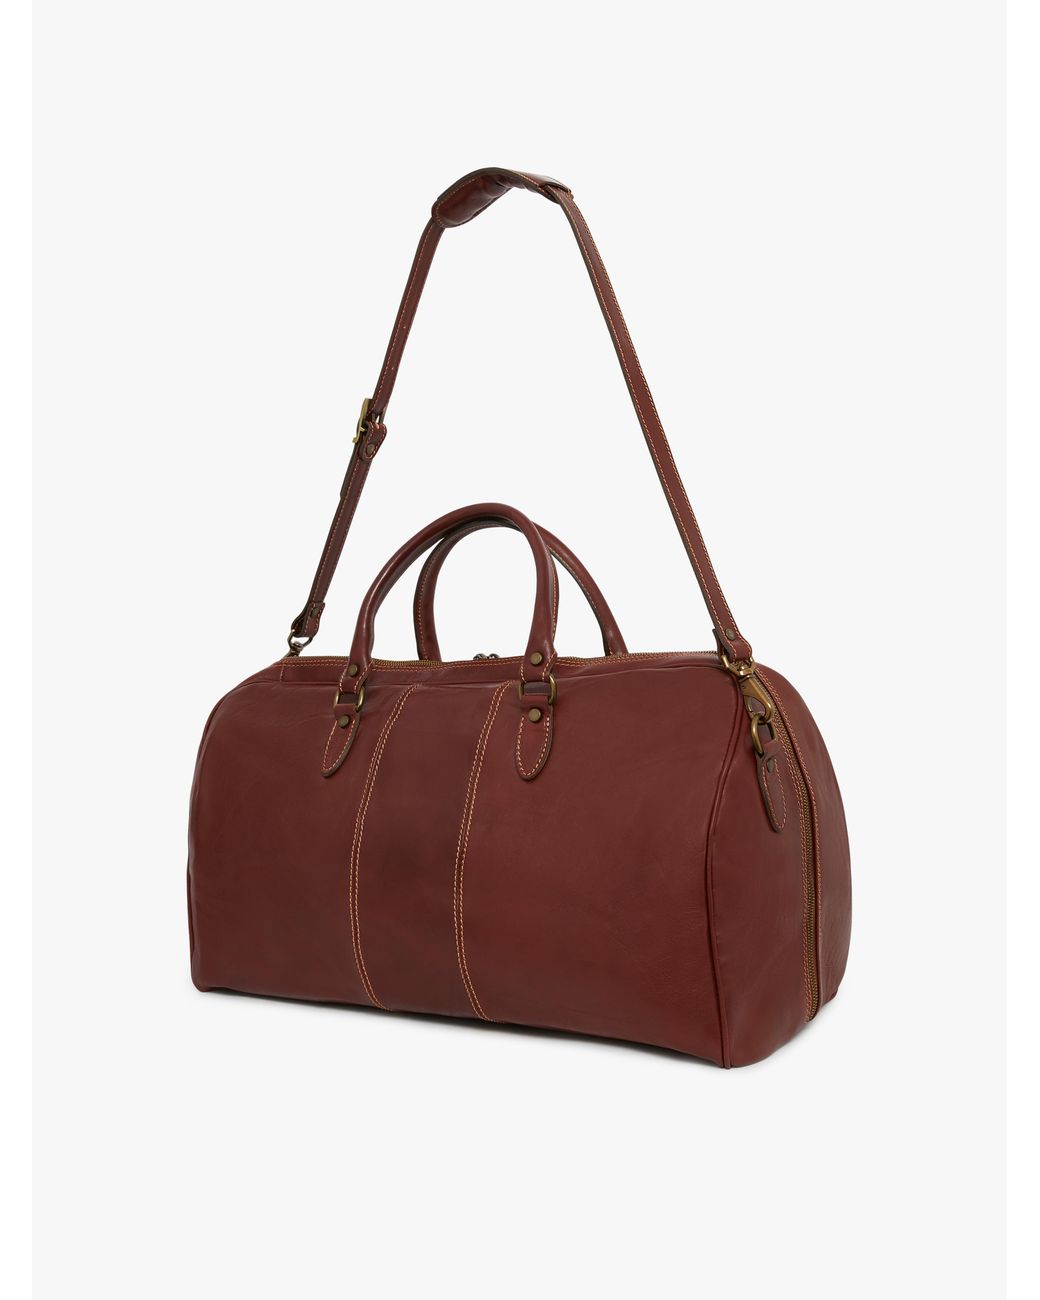 Shopping >rm williams weekend bag big sale - OFF 69%